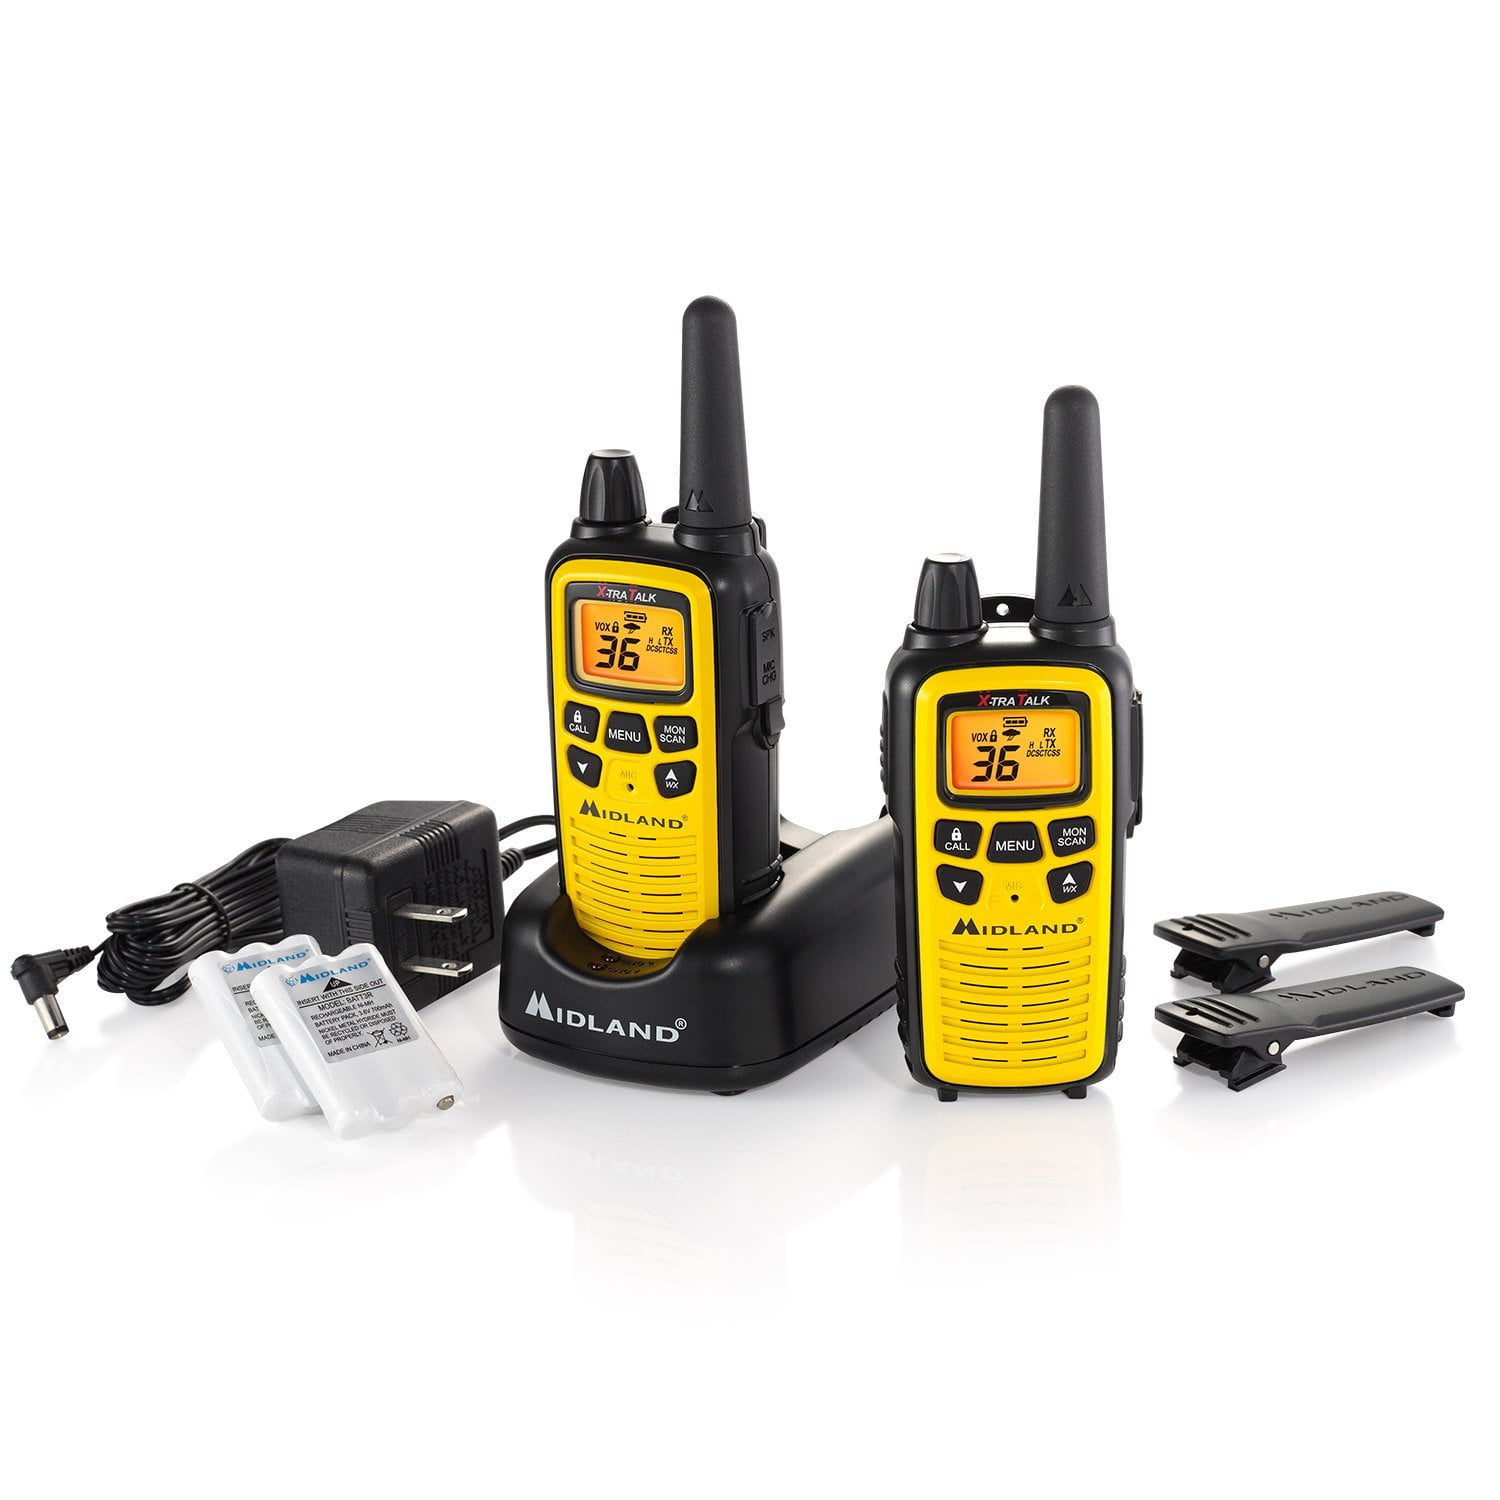 Up to 32 Mile Range Walkie Talkie Midland T61VP3 36 Channel FRS Two-Way Radio Yellow/Black Pack of 6 